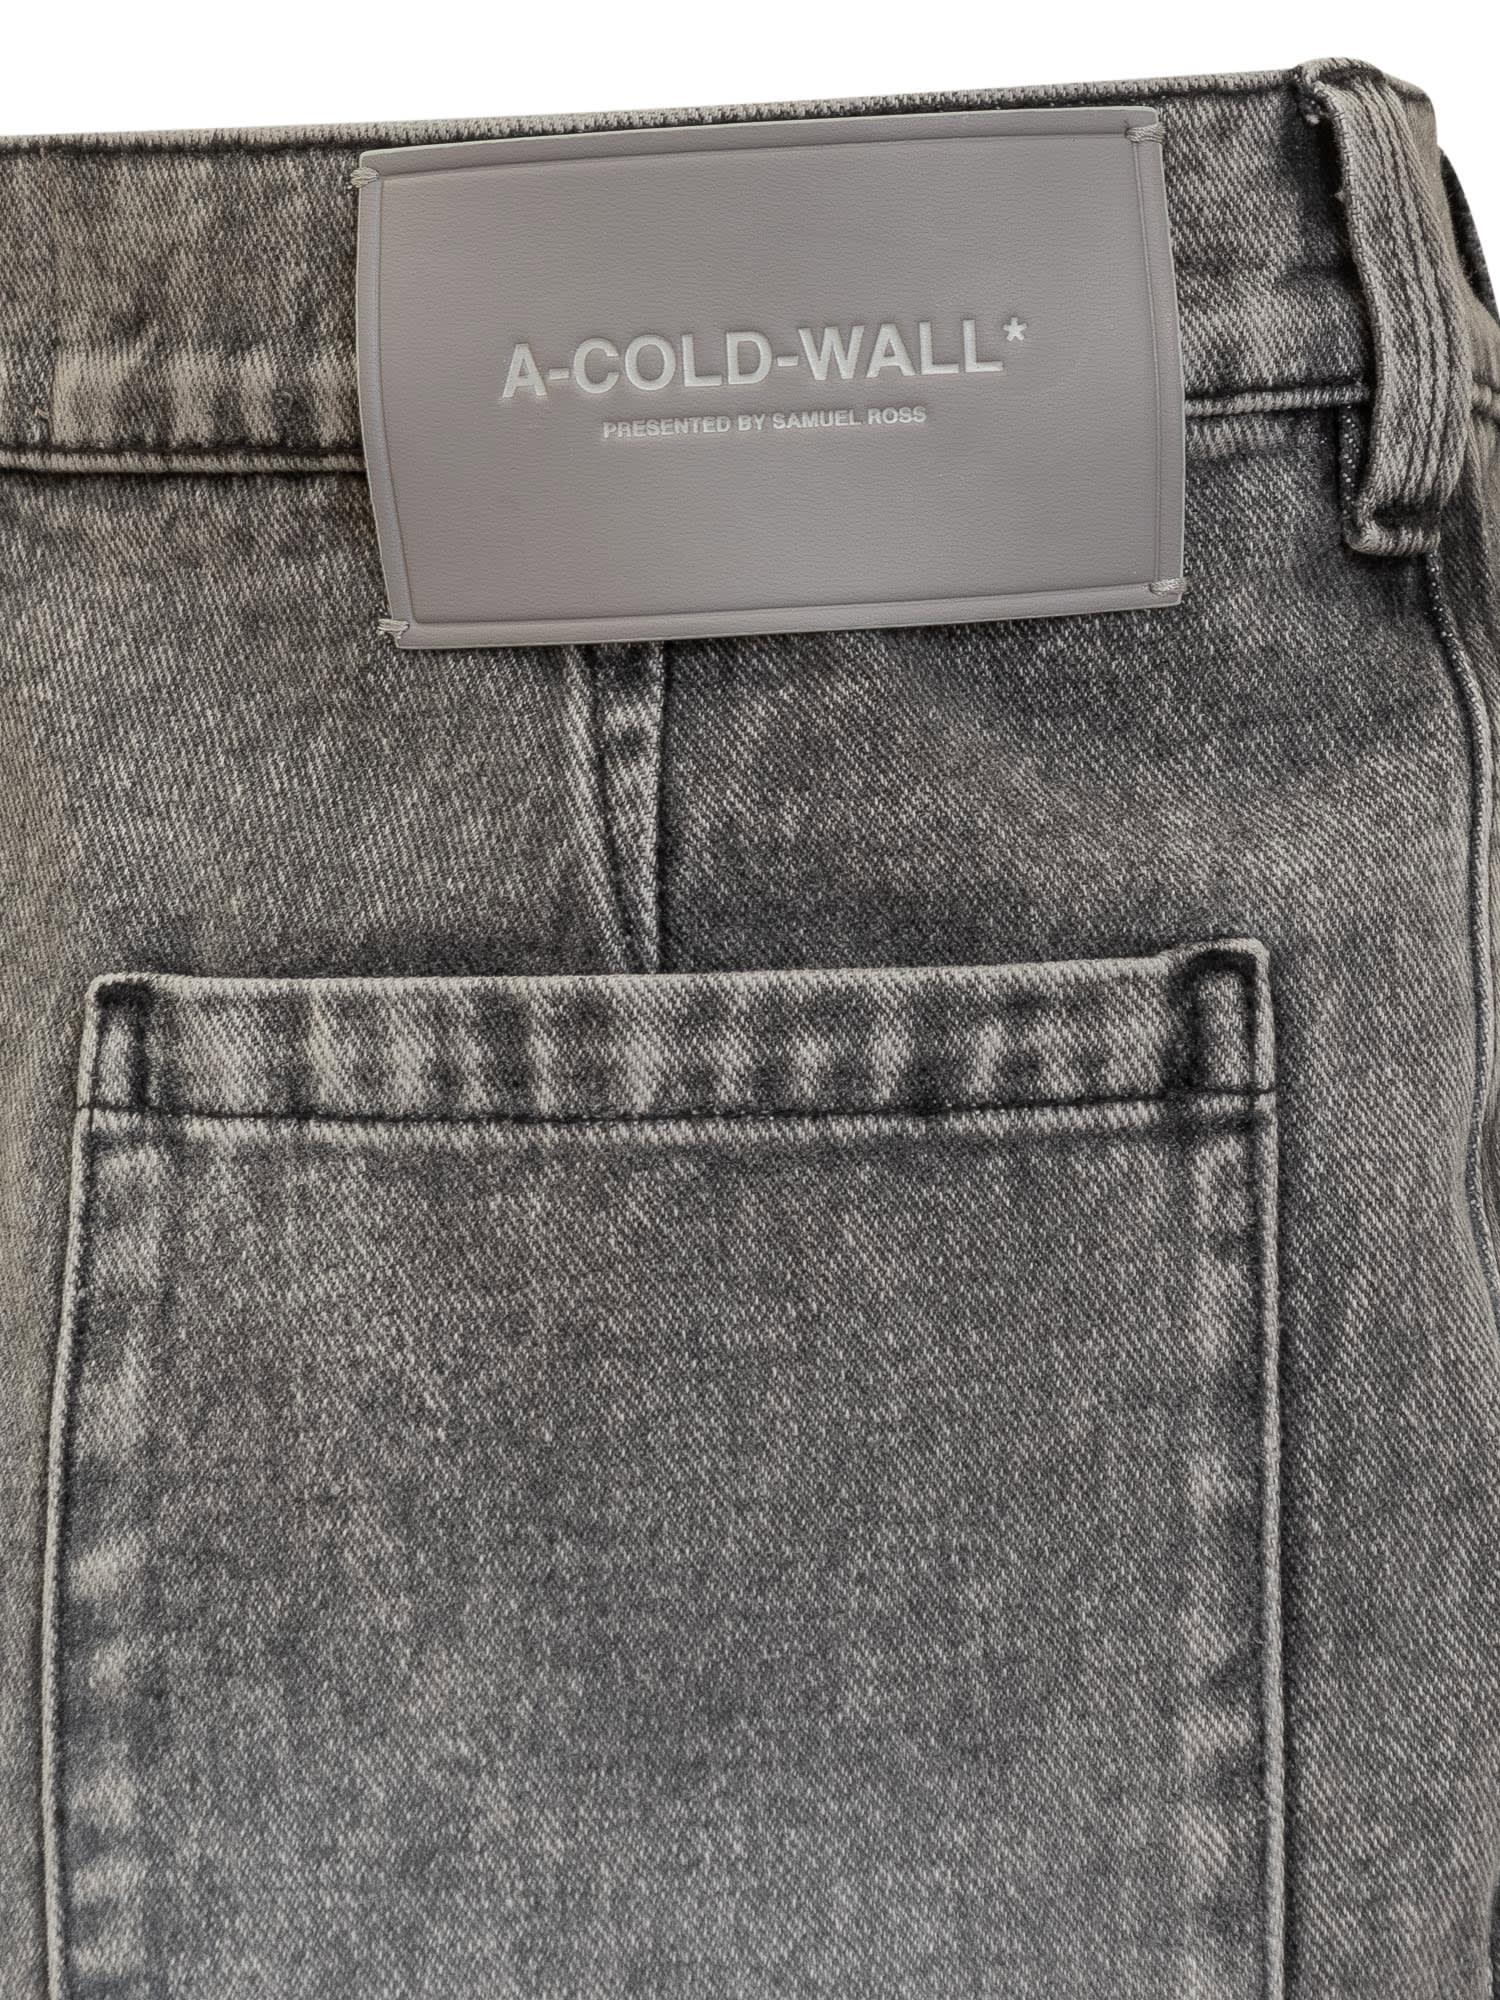 Shop A-cold-wall* Denim Shorts In Black/white